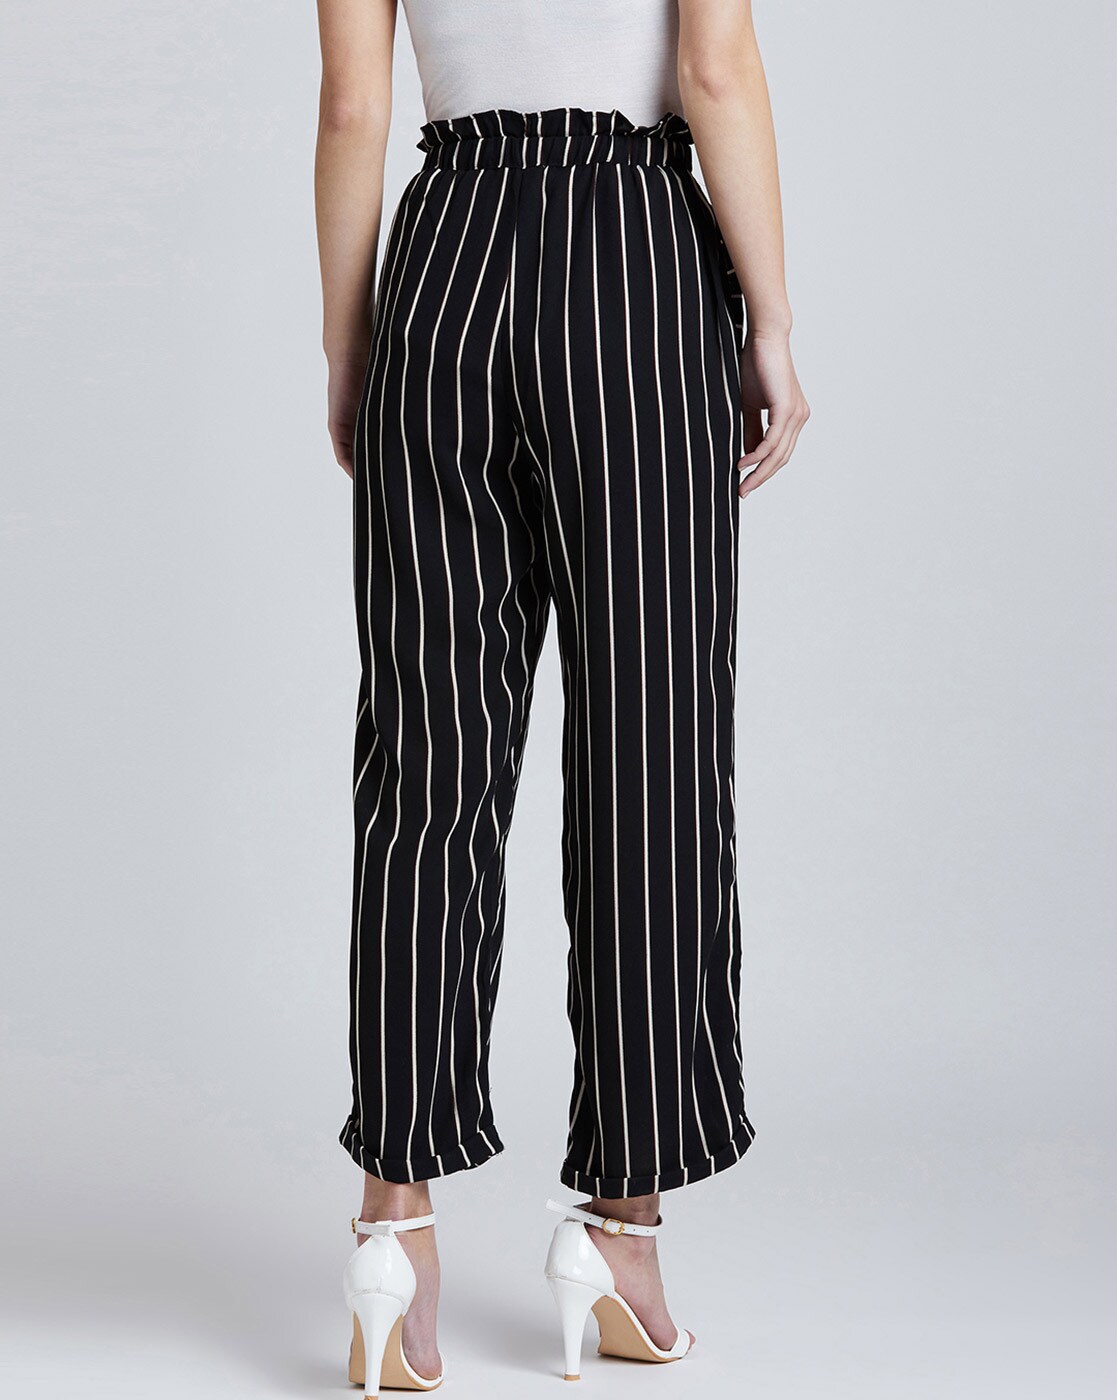 Relaxed summer in the city street style with wide leg striped trousers and  a pyjama-style top | Chic outfits spring, Spring outfits casual, Spring  outfits